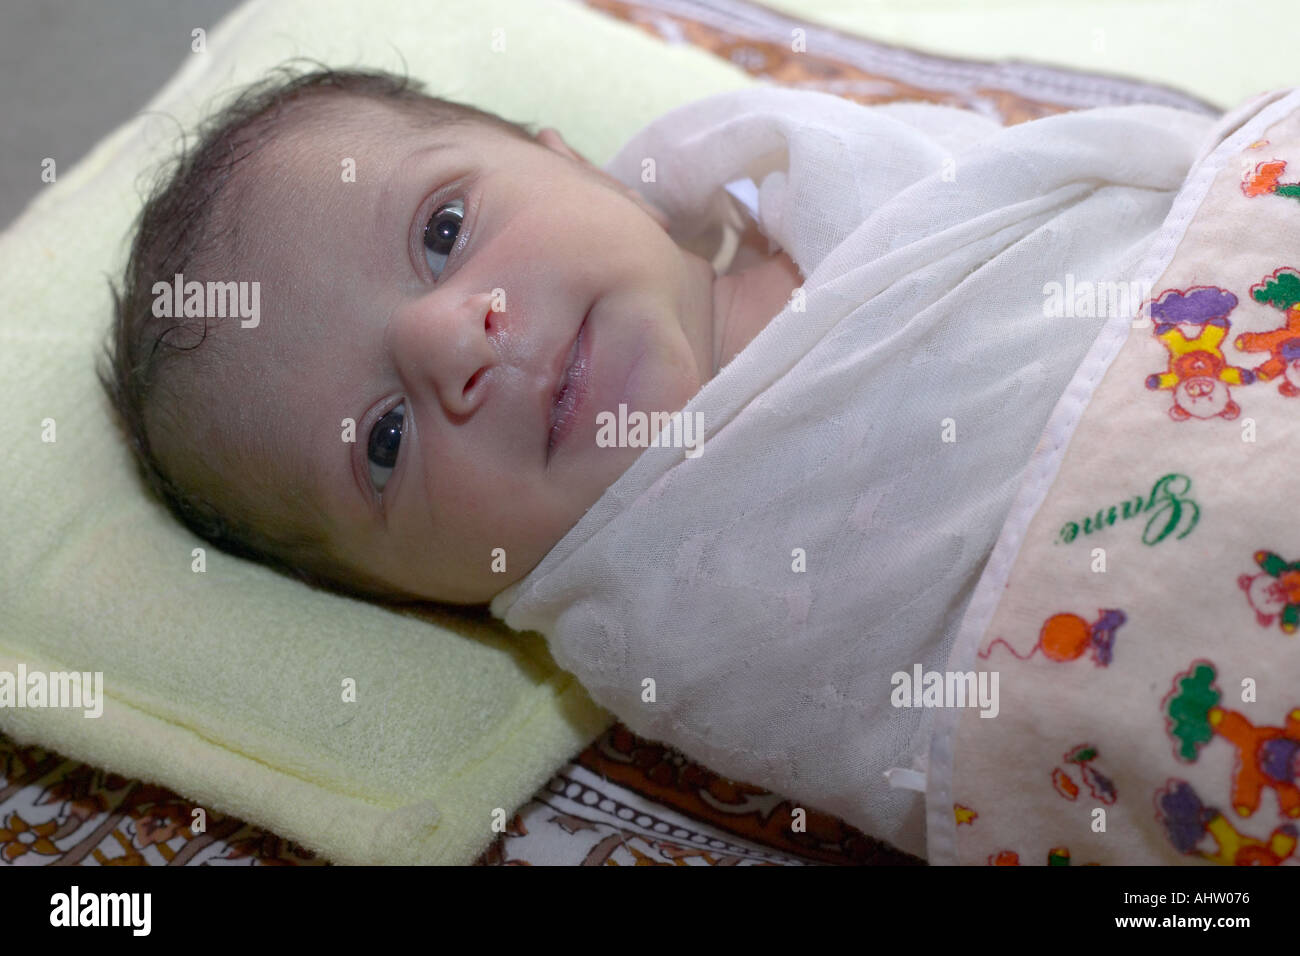 AAD 91769 Just born ten day old new Indian Baby Girl child lying wrapped on bed Model Released Stock Photo